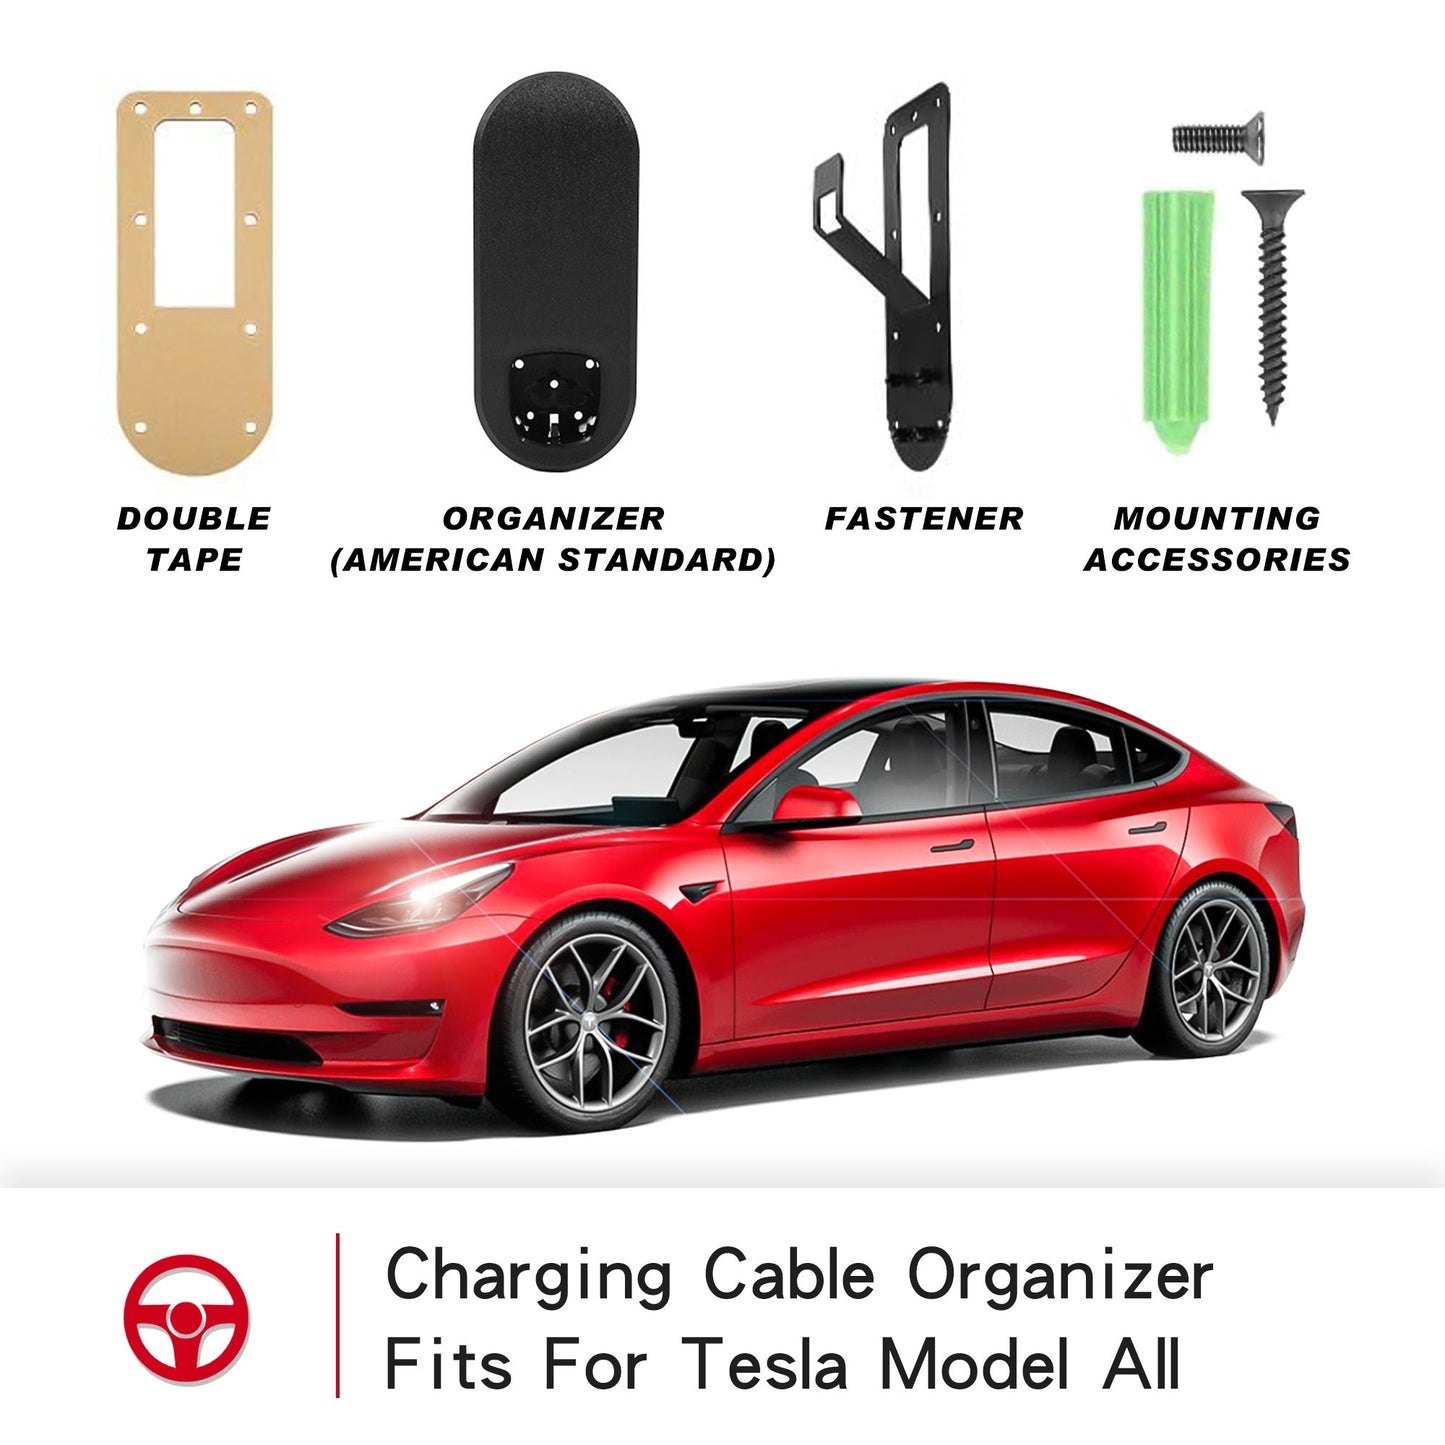 Tesla Charging Cable Organizer,Wall Mount Connector Bracket Charger Holder Adapter for Model 3/Y/X/S